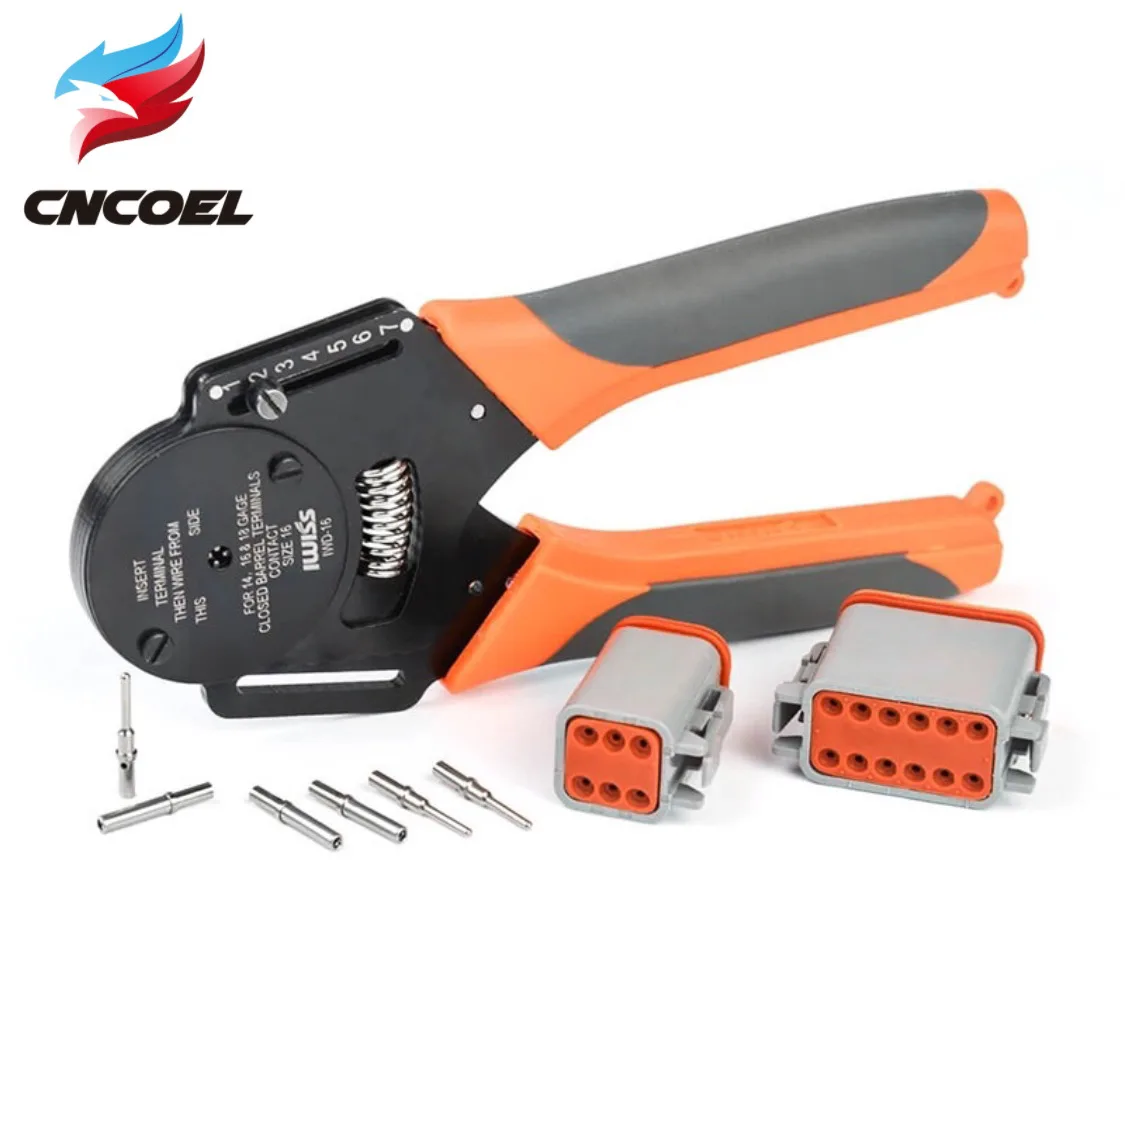 IWD-16 suitable for Deutsch connector crimping pliers Machining car terminal lathe male and female pin 18/16/14 AWG w2 Pliers